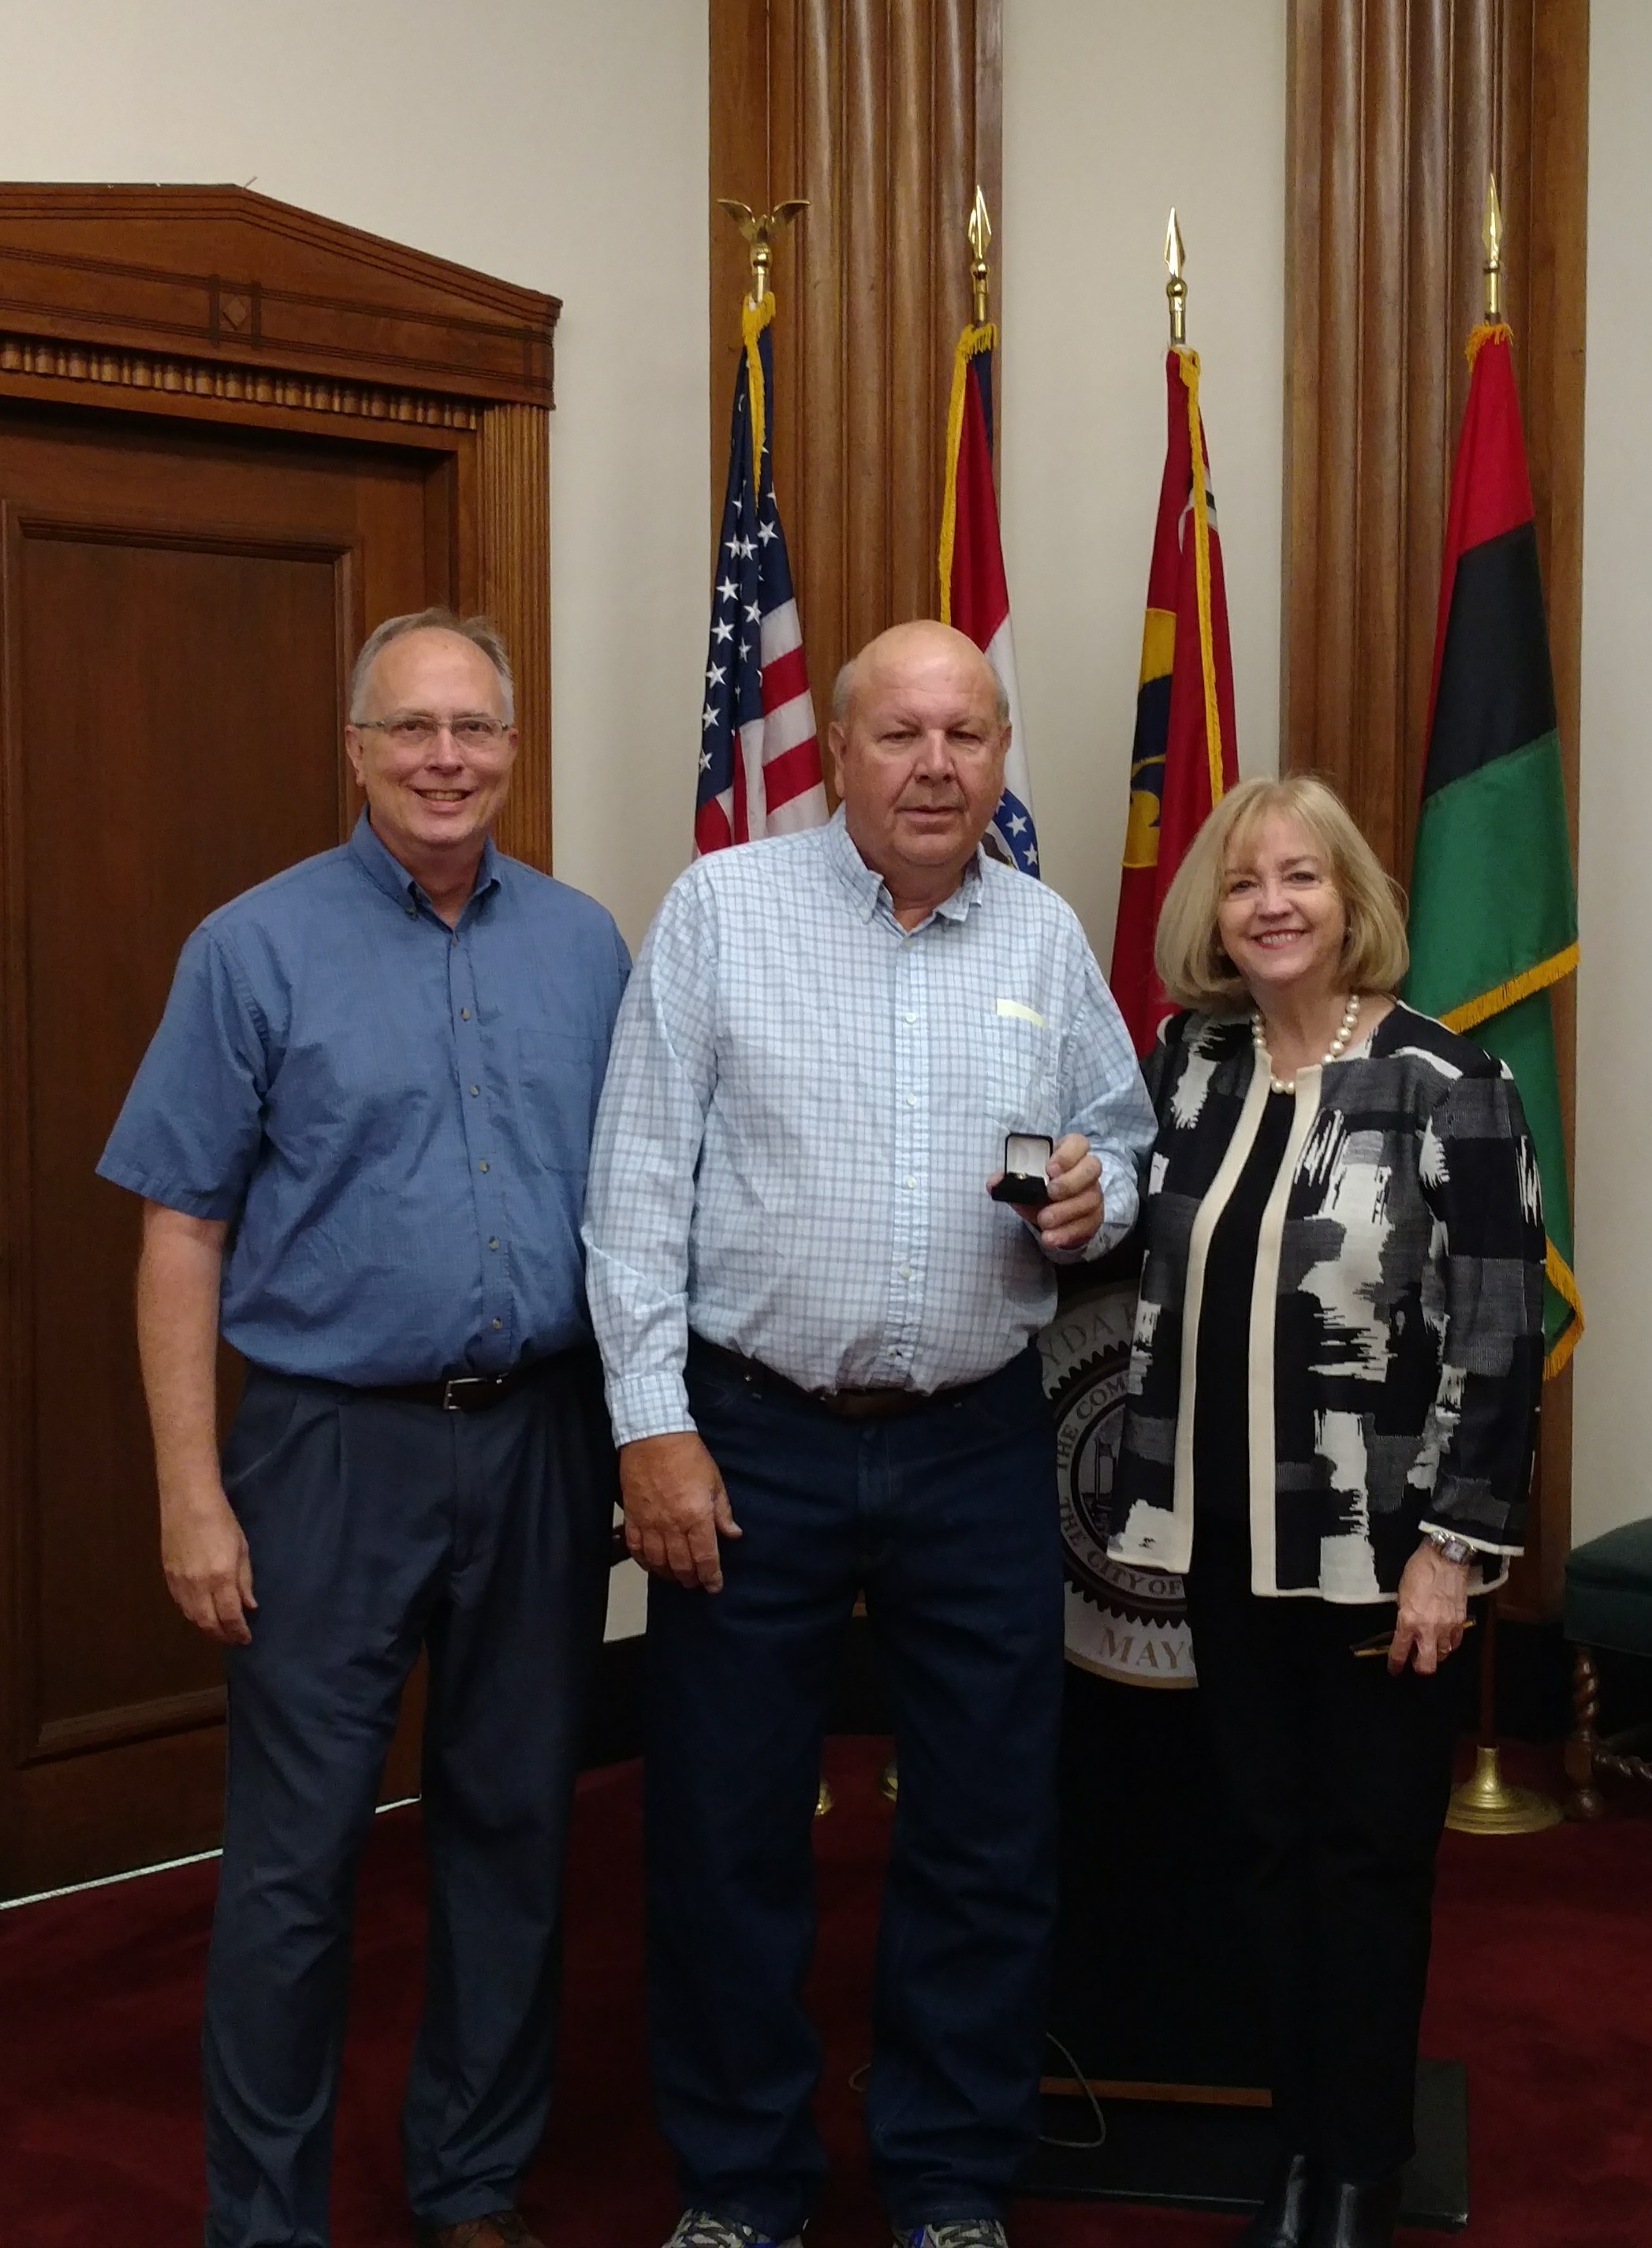 Public Utilities Director Curt Skouby (l) and Mayor Lyda Krewson congratulation Bill Jansen on his 40 years of service to the City of St. Louis.